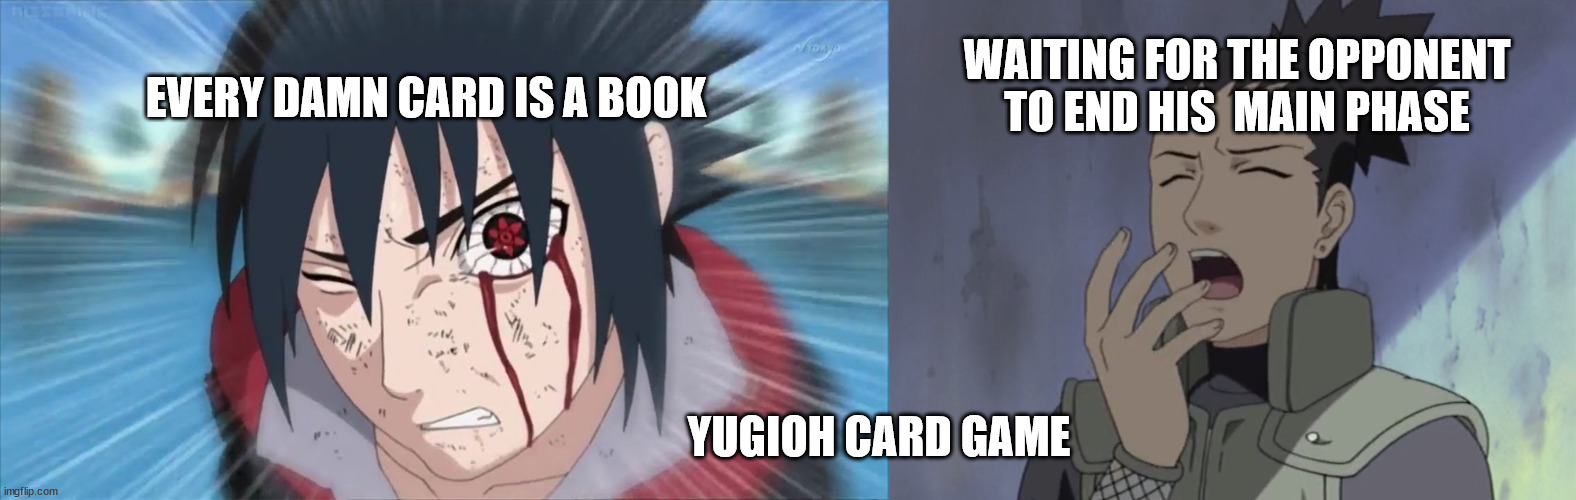 modern yugioh in a nutshell |  EVERY DAMN CARD IS A BOOK; WAITING FOR THE OPPONENT TO END HIS  MAIN PHASE; YUGIOH CARD GAME | image tagged in yugioh,sasuke,konami,magic the gathering | made w/ Imgflip meme maker